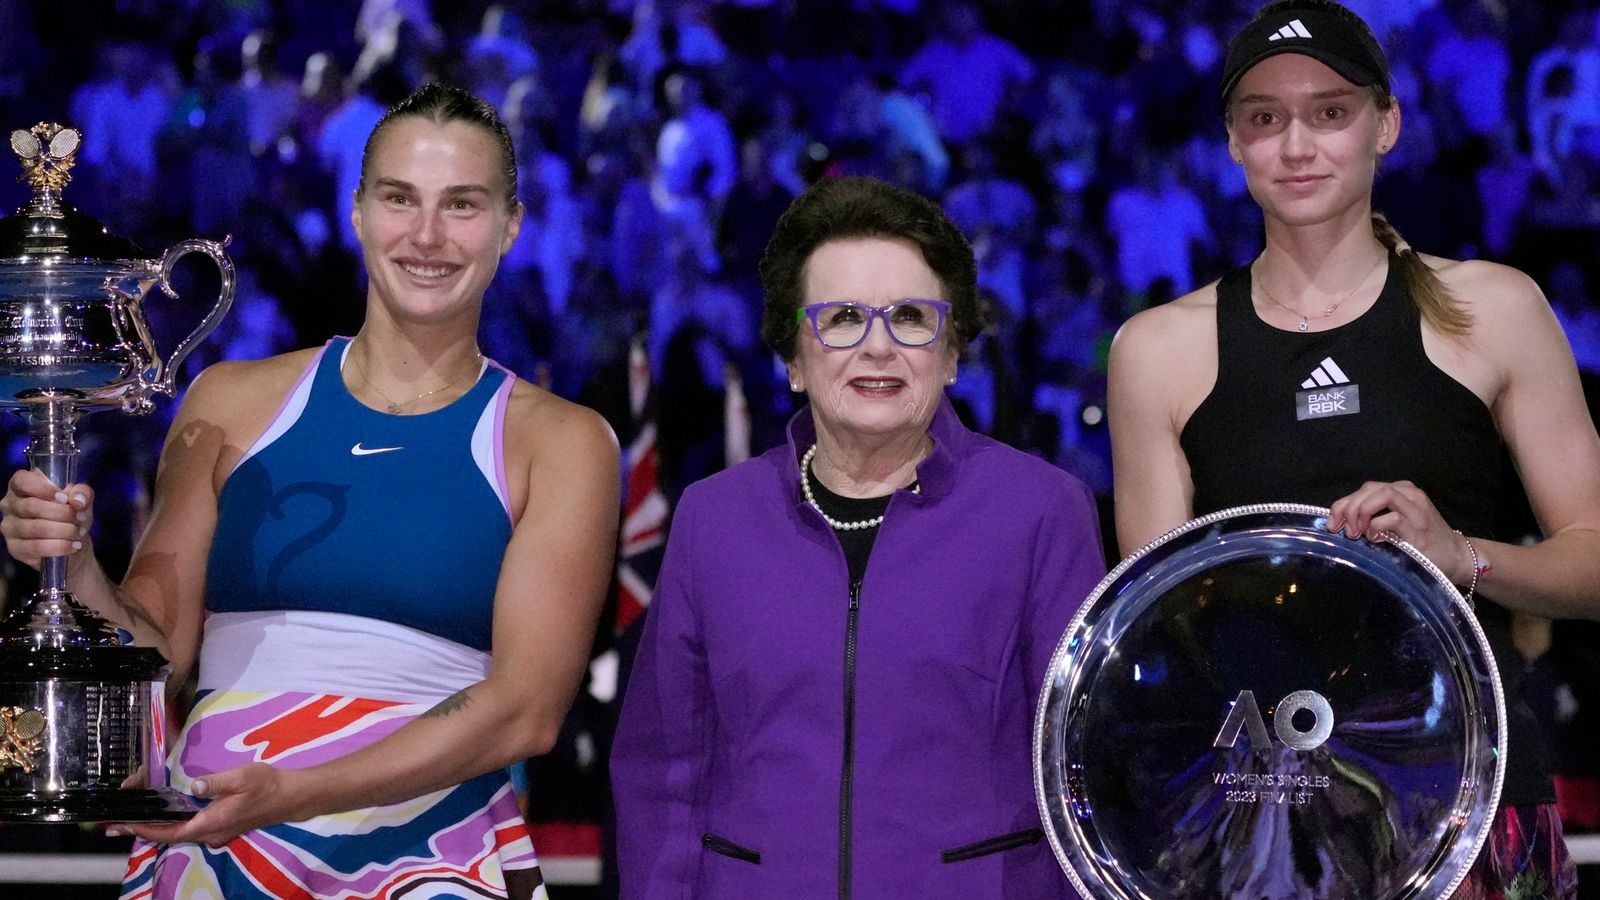 Billie Jean King: Creating the WTA ‘was really scary’ but current stars now ‘living our dream’